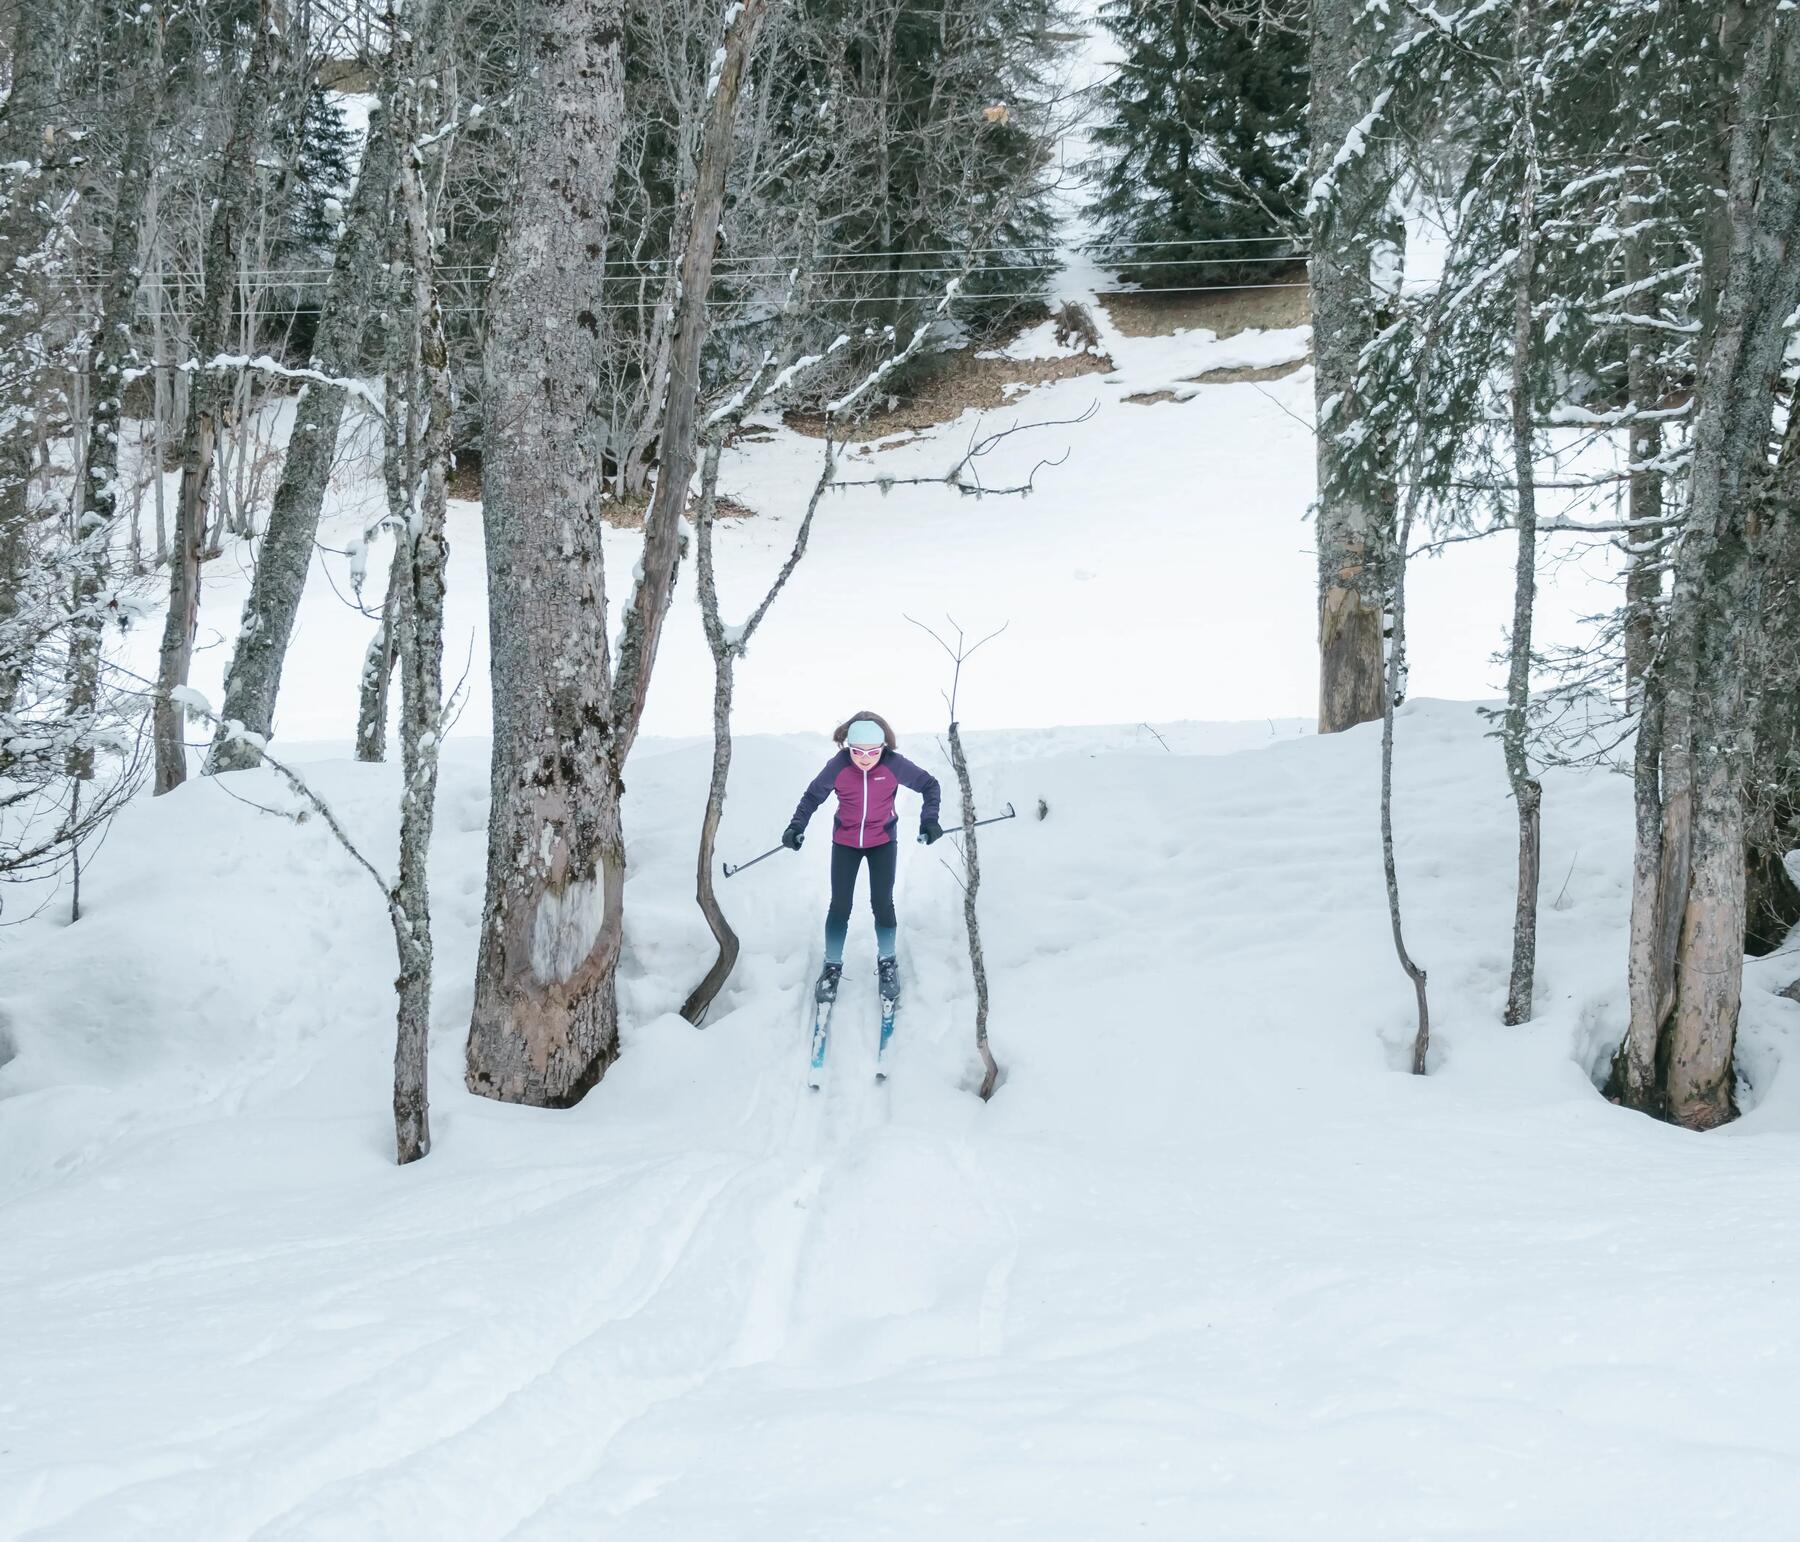 young girl cross-country skiing